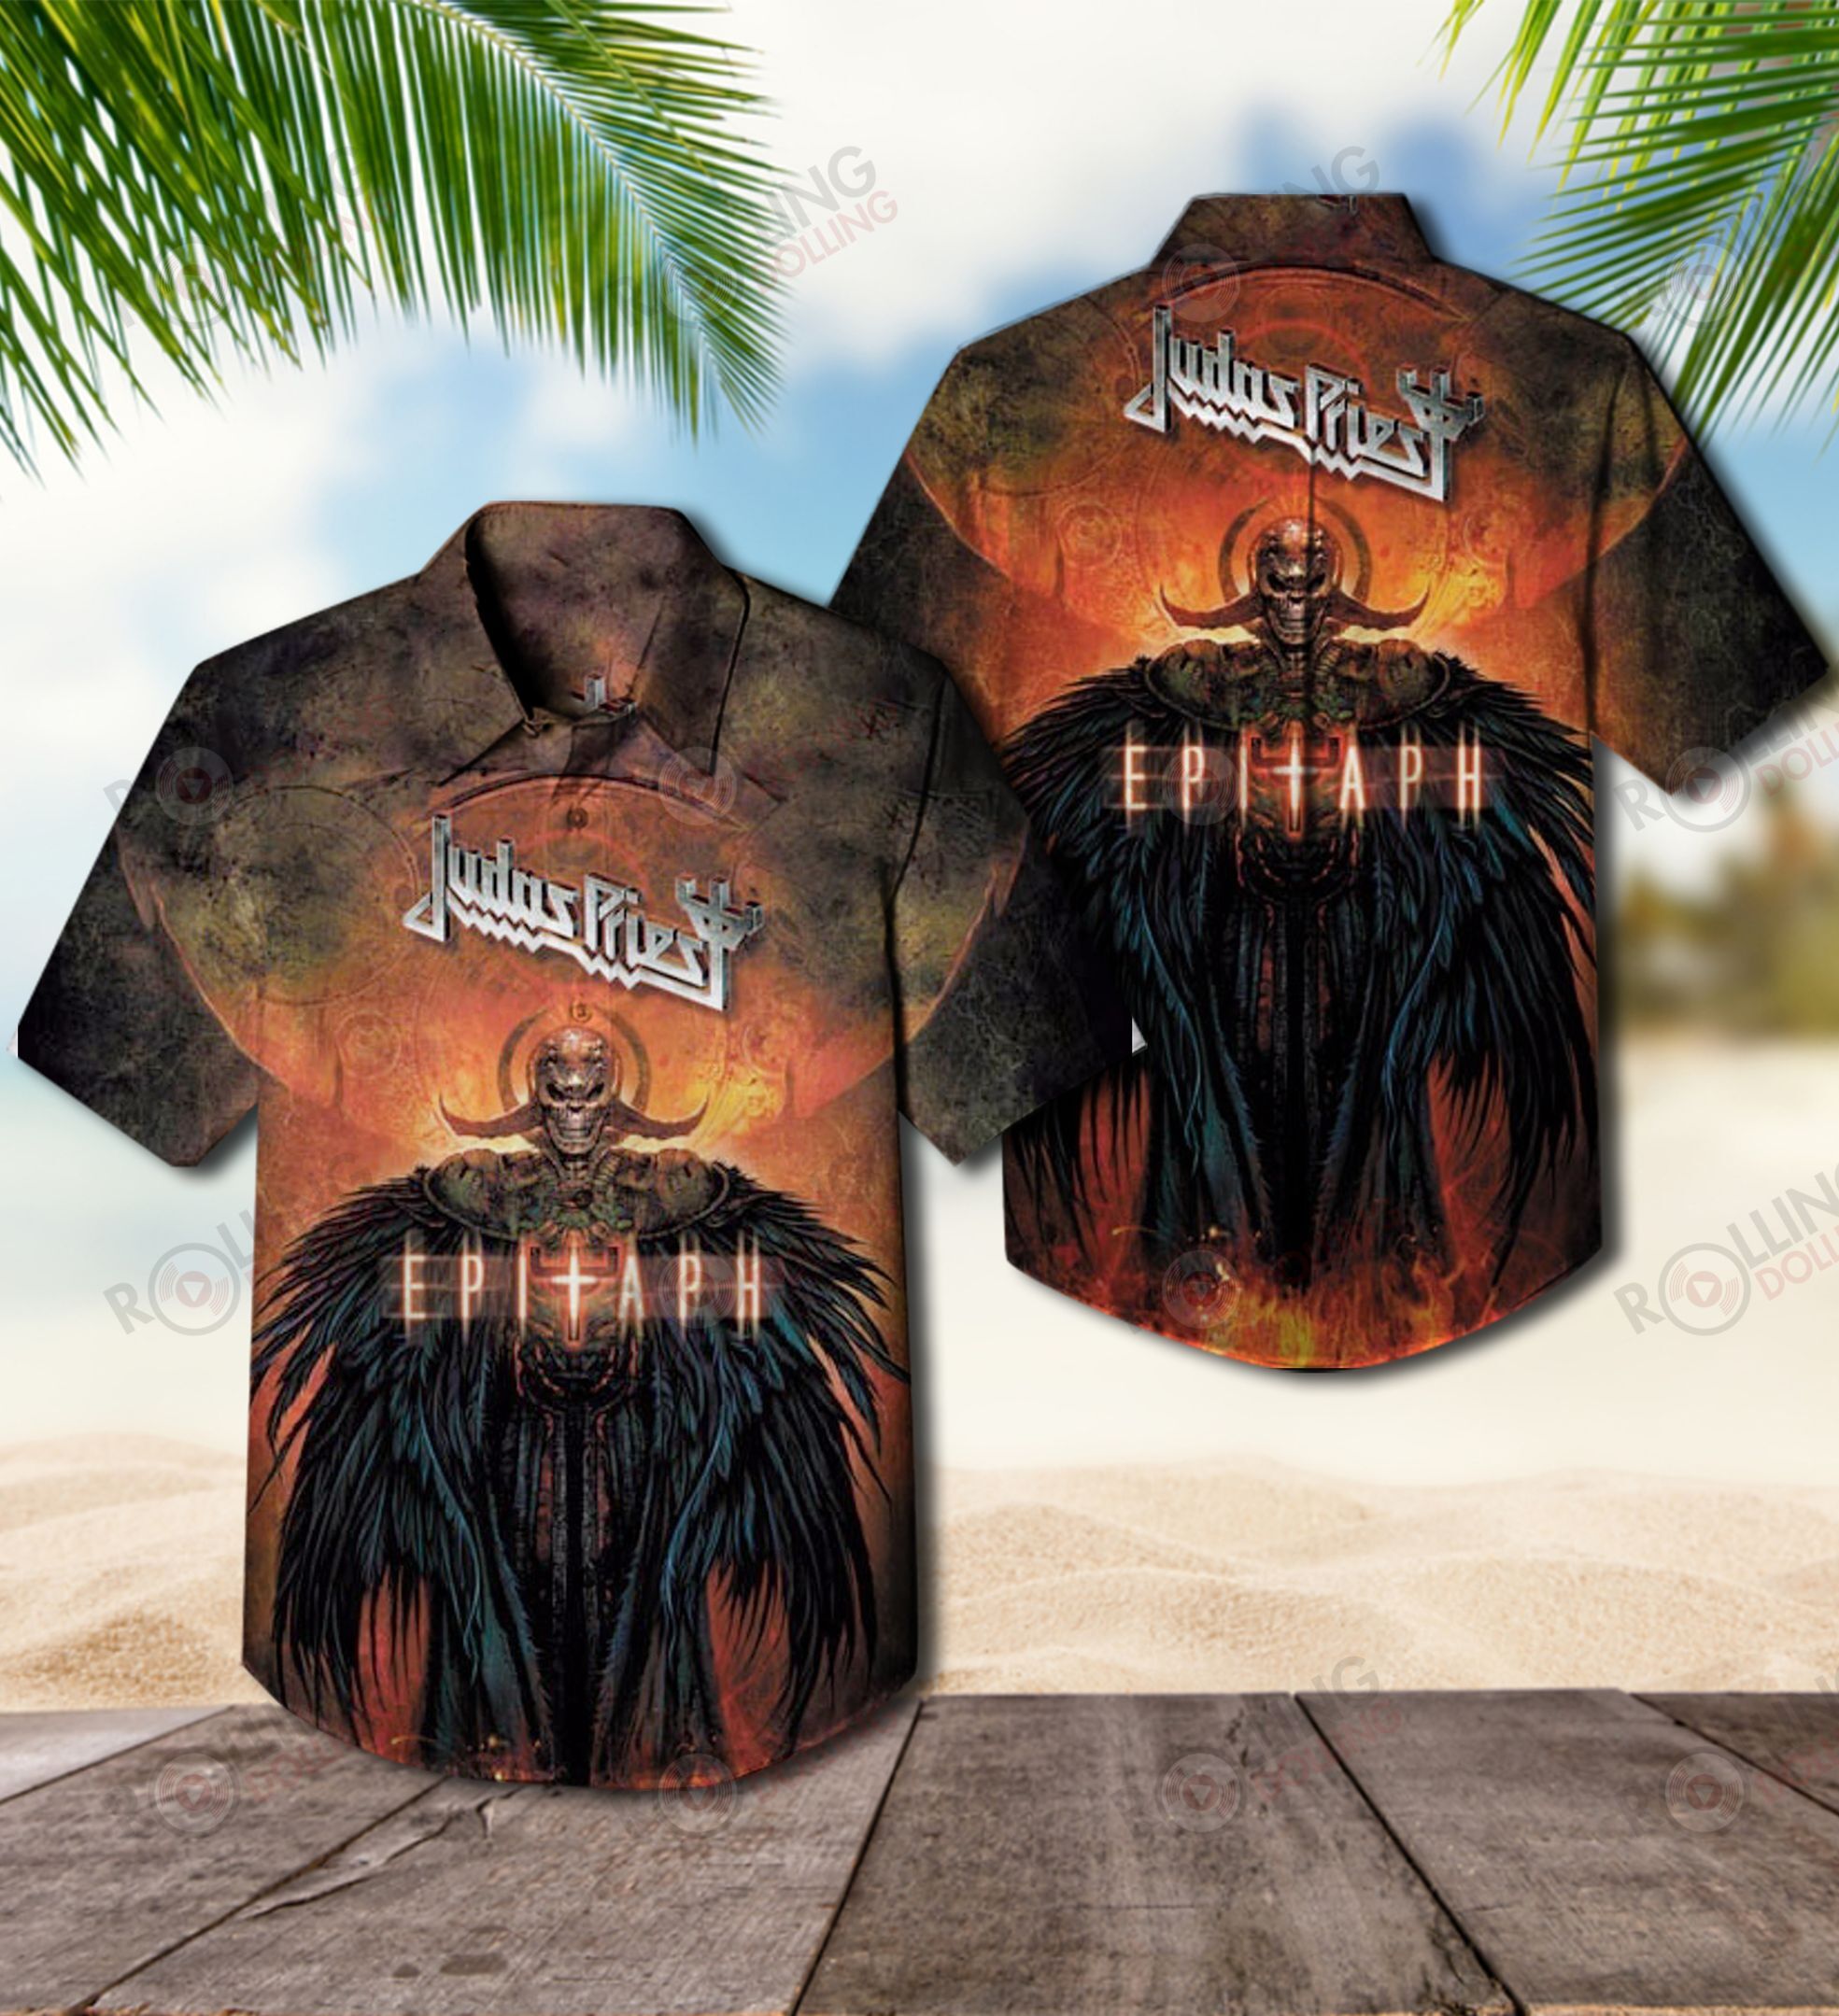 You'll have the perfect vacation outfit with this Hawaiian shirt 179